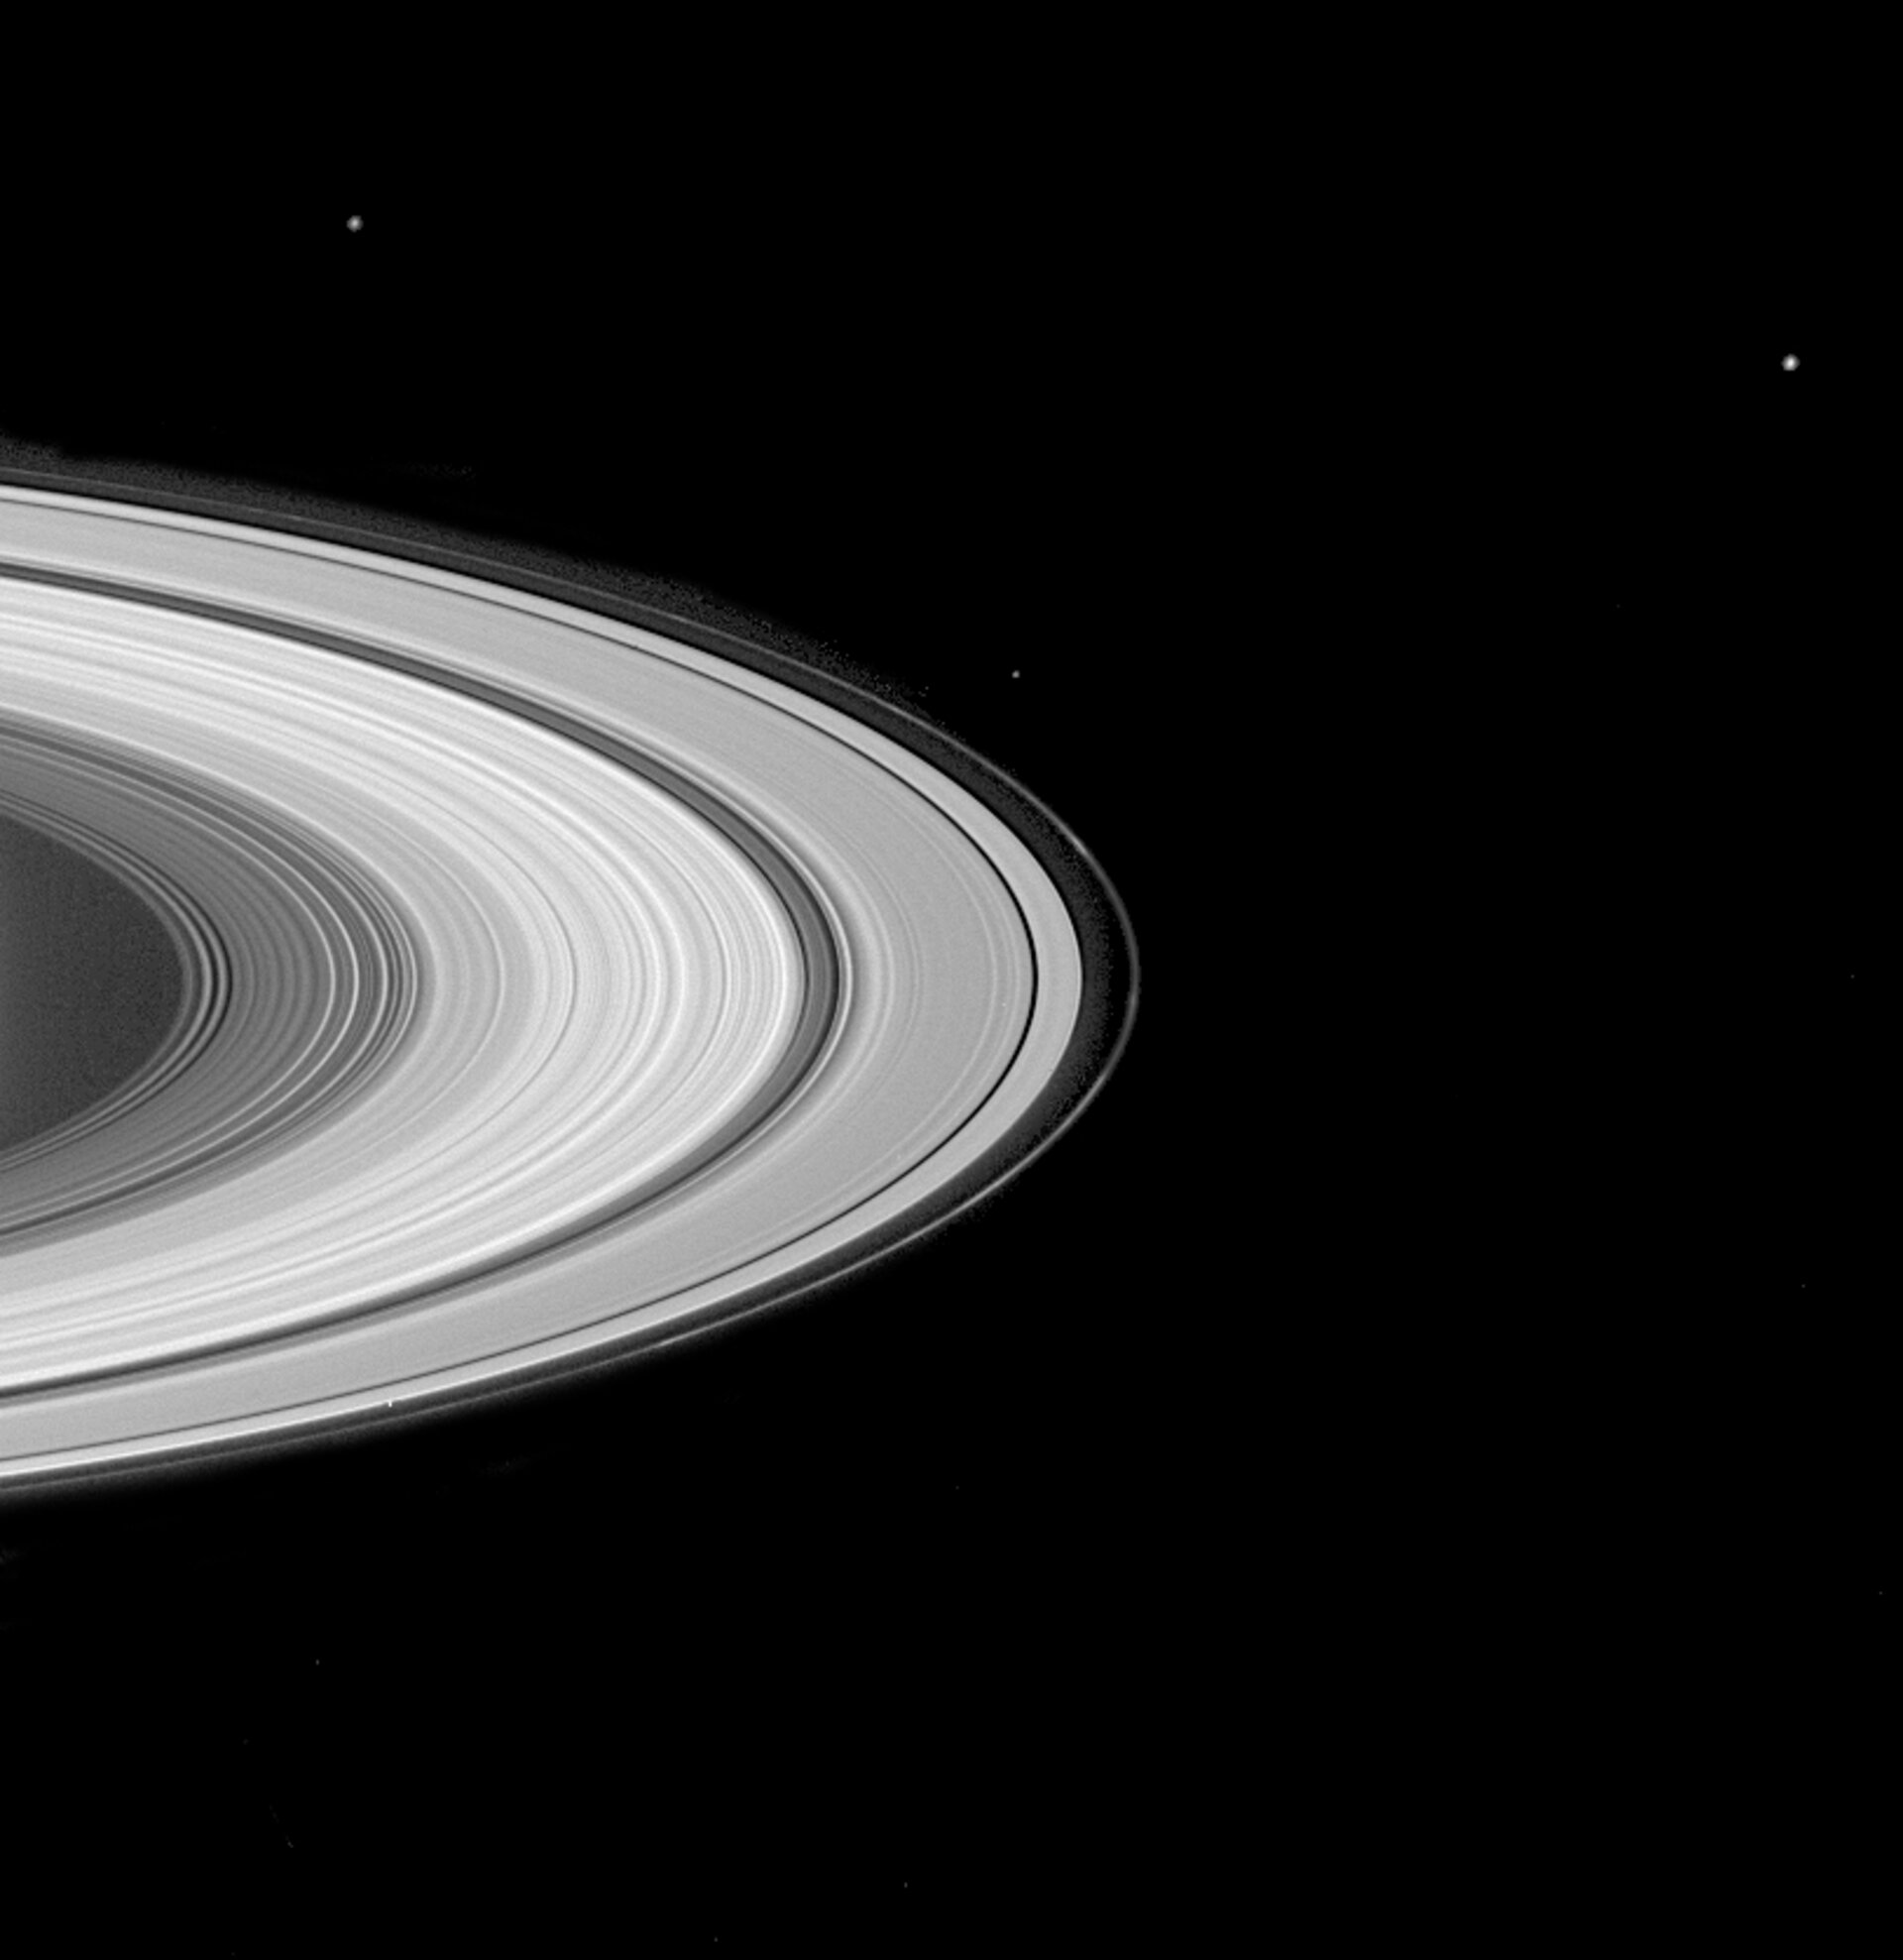 Groovy Rings and Moons